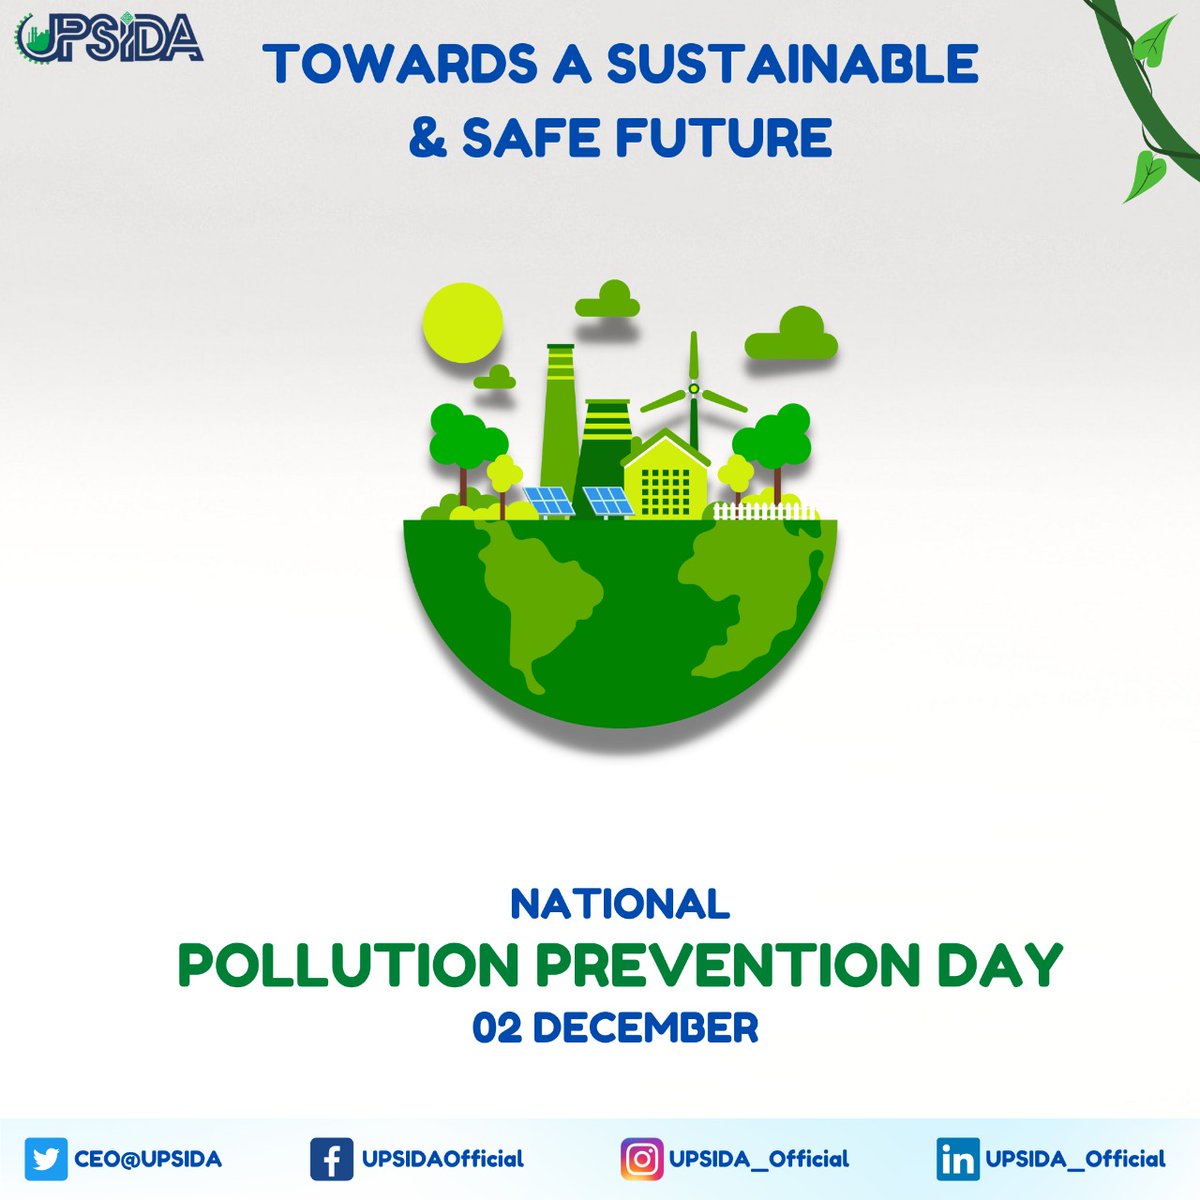 For the Growth of the Country and Environment

National Pollution Prevention Day
2nd December 2022

#pollutionprevention #goclean #Development